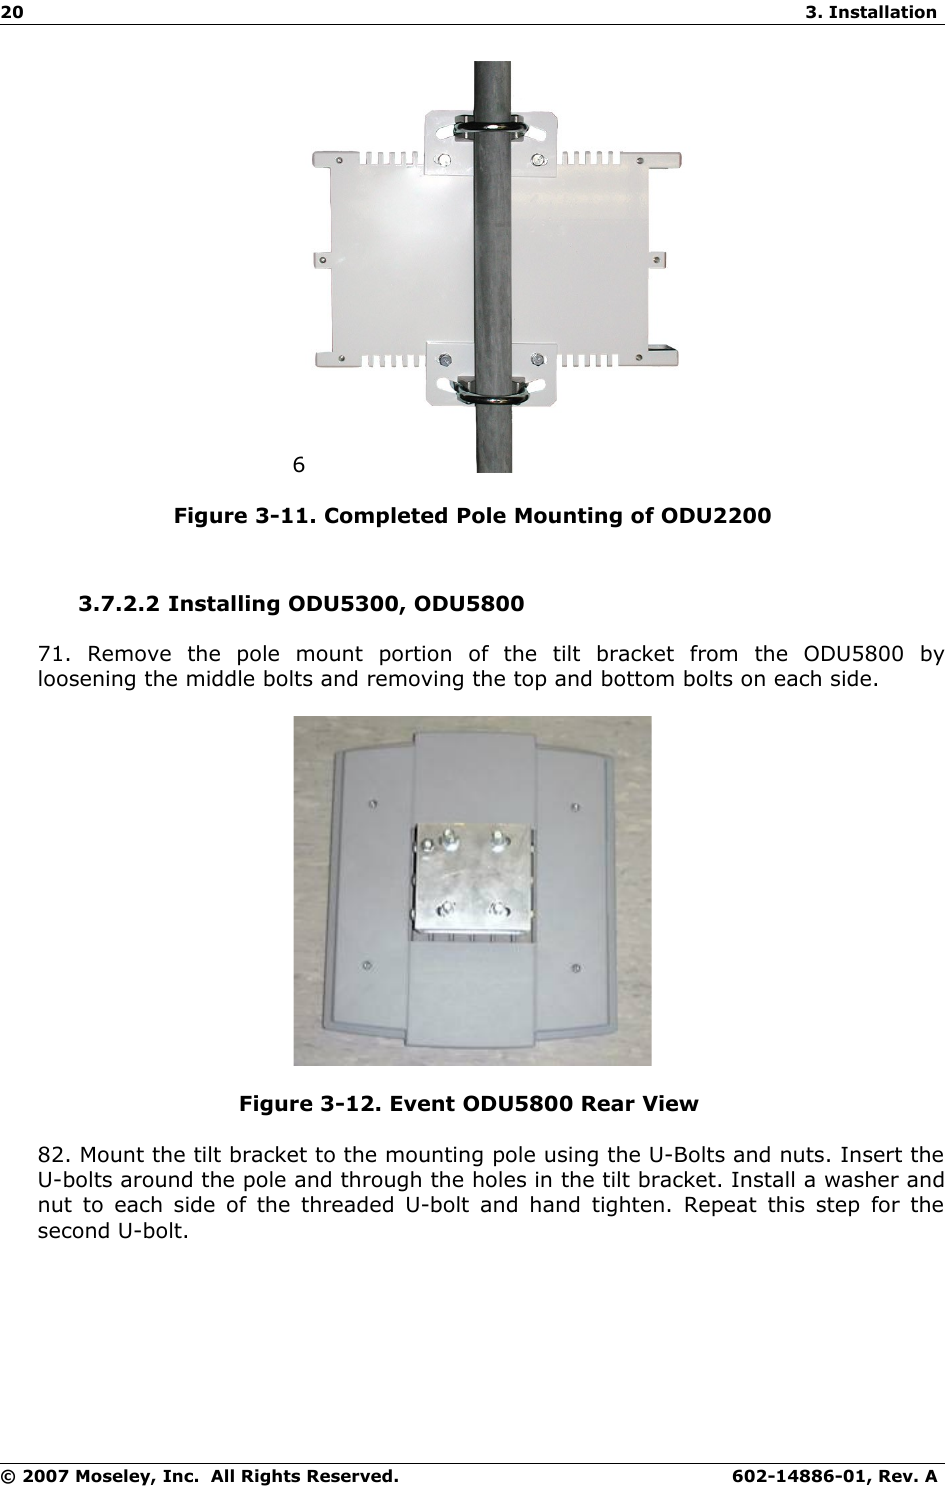 20 3. Installation6Figure 3-11. Completed Pole Mounting of ODU22003.7.2.2 Installing ODU5300, ODU580071.   Remove   the   pole   mount   portion   of   the   tilt   bracket   from   the   ODU5800   by loosening the middle bolts and removing the top and bottom bolts on each side. Figure 3-12. Event ODU5800 Rear View 82. Mount the tilt bracket to the mounting pole using the U-Bolts and nuts. Insert the U-bolts around the pole and through the holes in the tilt bracket. Install a washer and nut to each side of the threaded U-bolt and hand tighten. Repeat this step for the second U-bolt. © 2007 Moseley, Inc.  All Rights Reserved. 602-14886-01, Rev. A